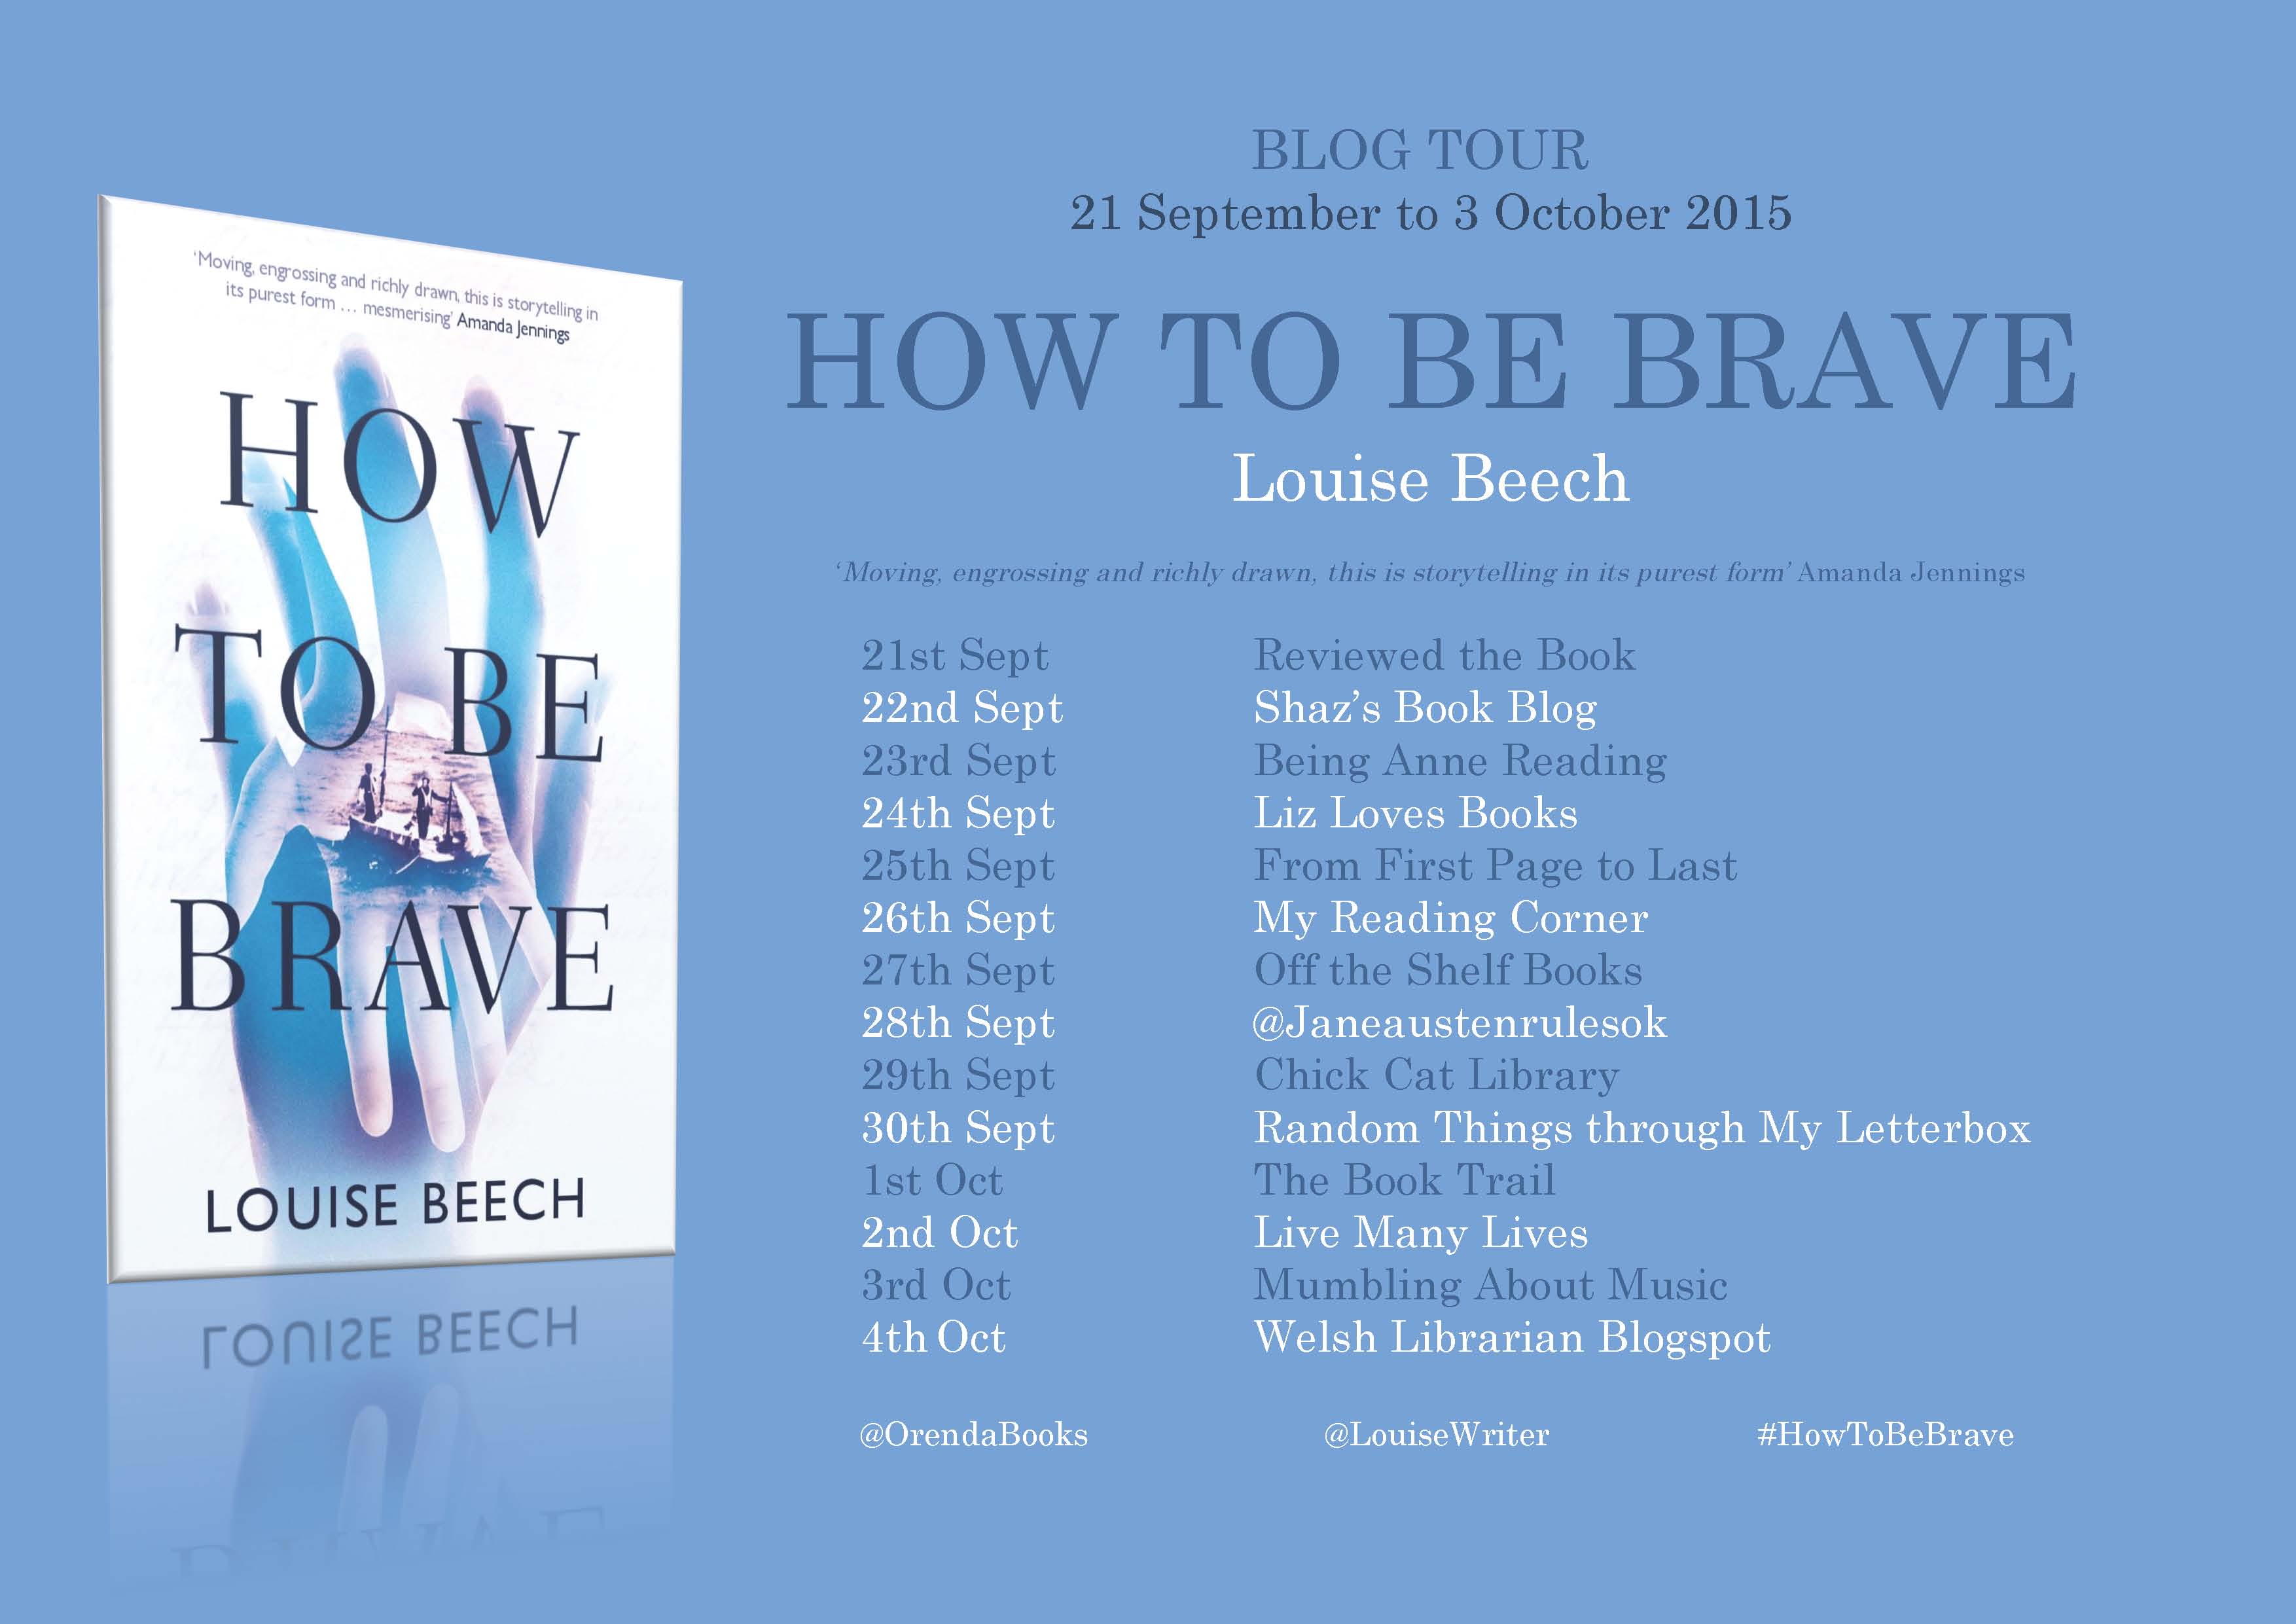 How To Be Brave blog tour-2